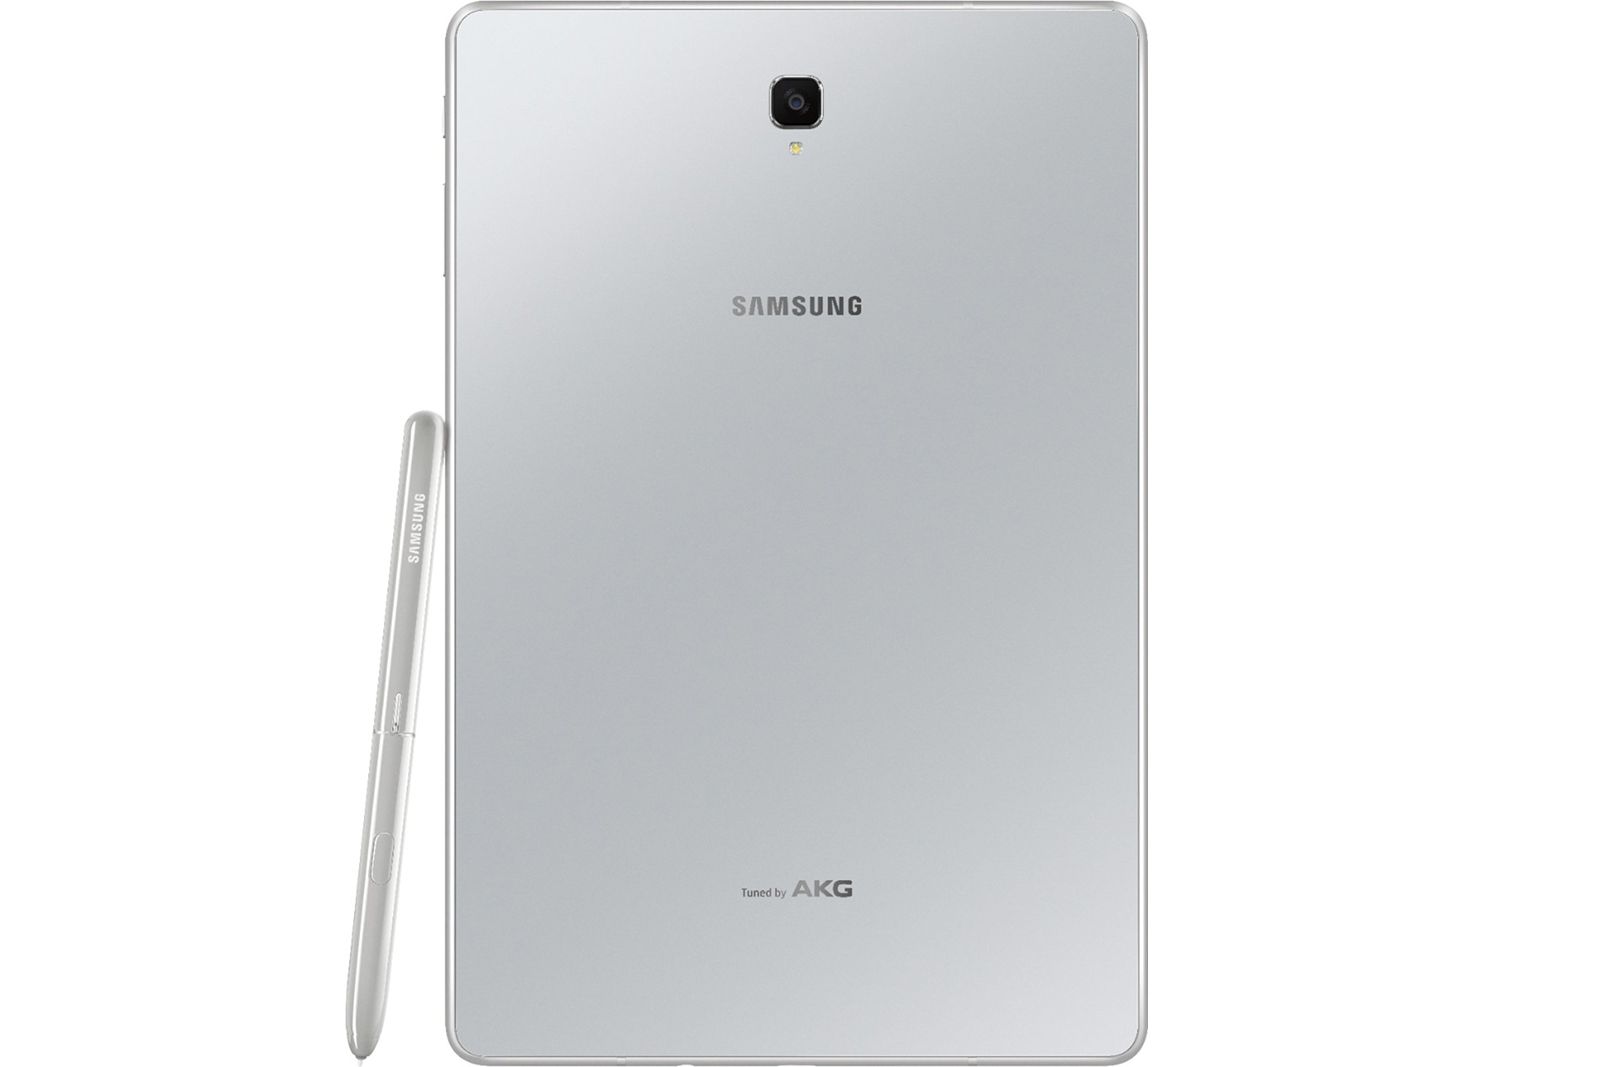 Your Eyes Arent Deceiving You This Really Is The White Samsung Galaxy Tab S4 image 2